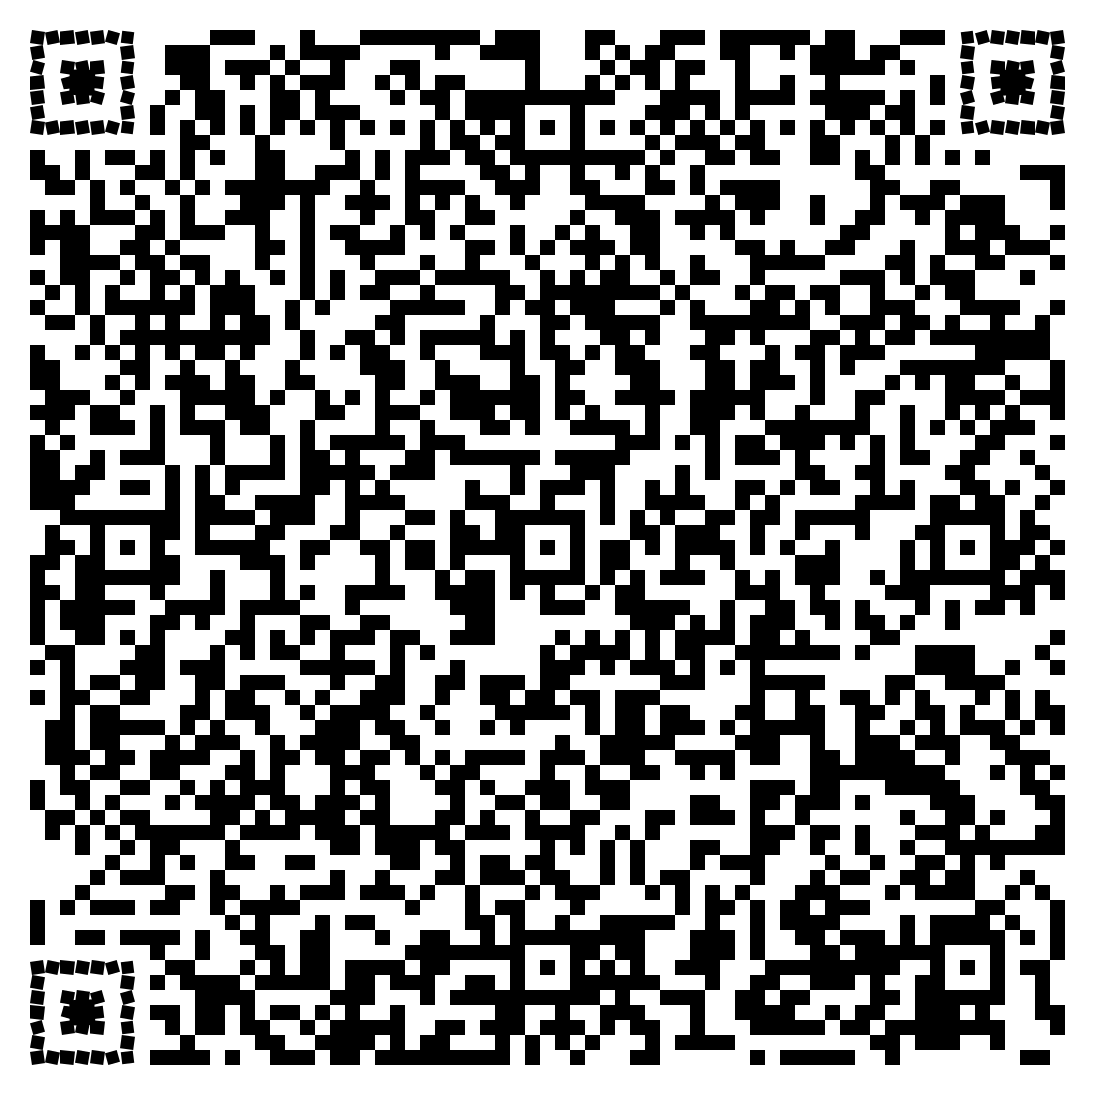 QR Code with vCard Info